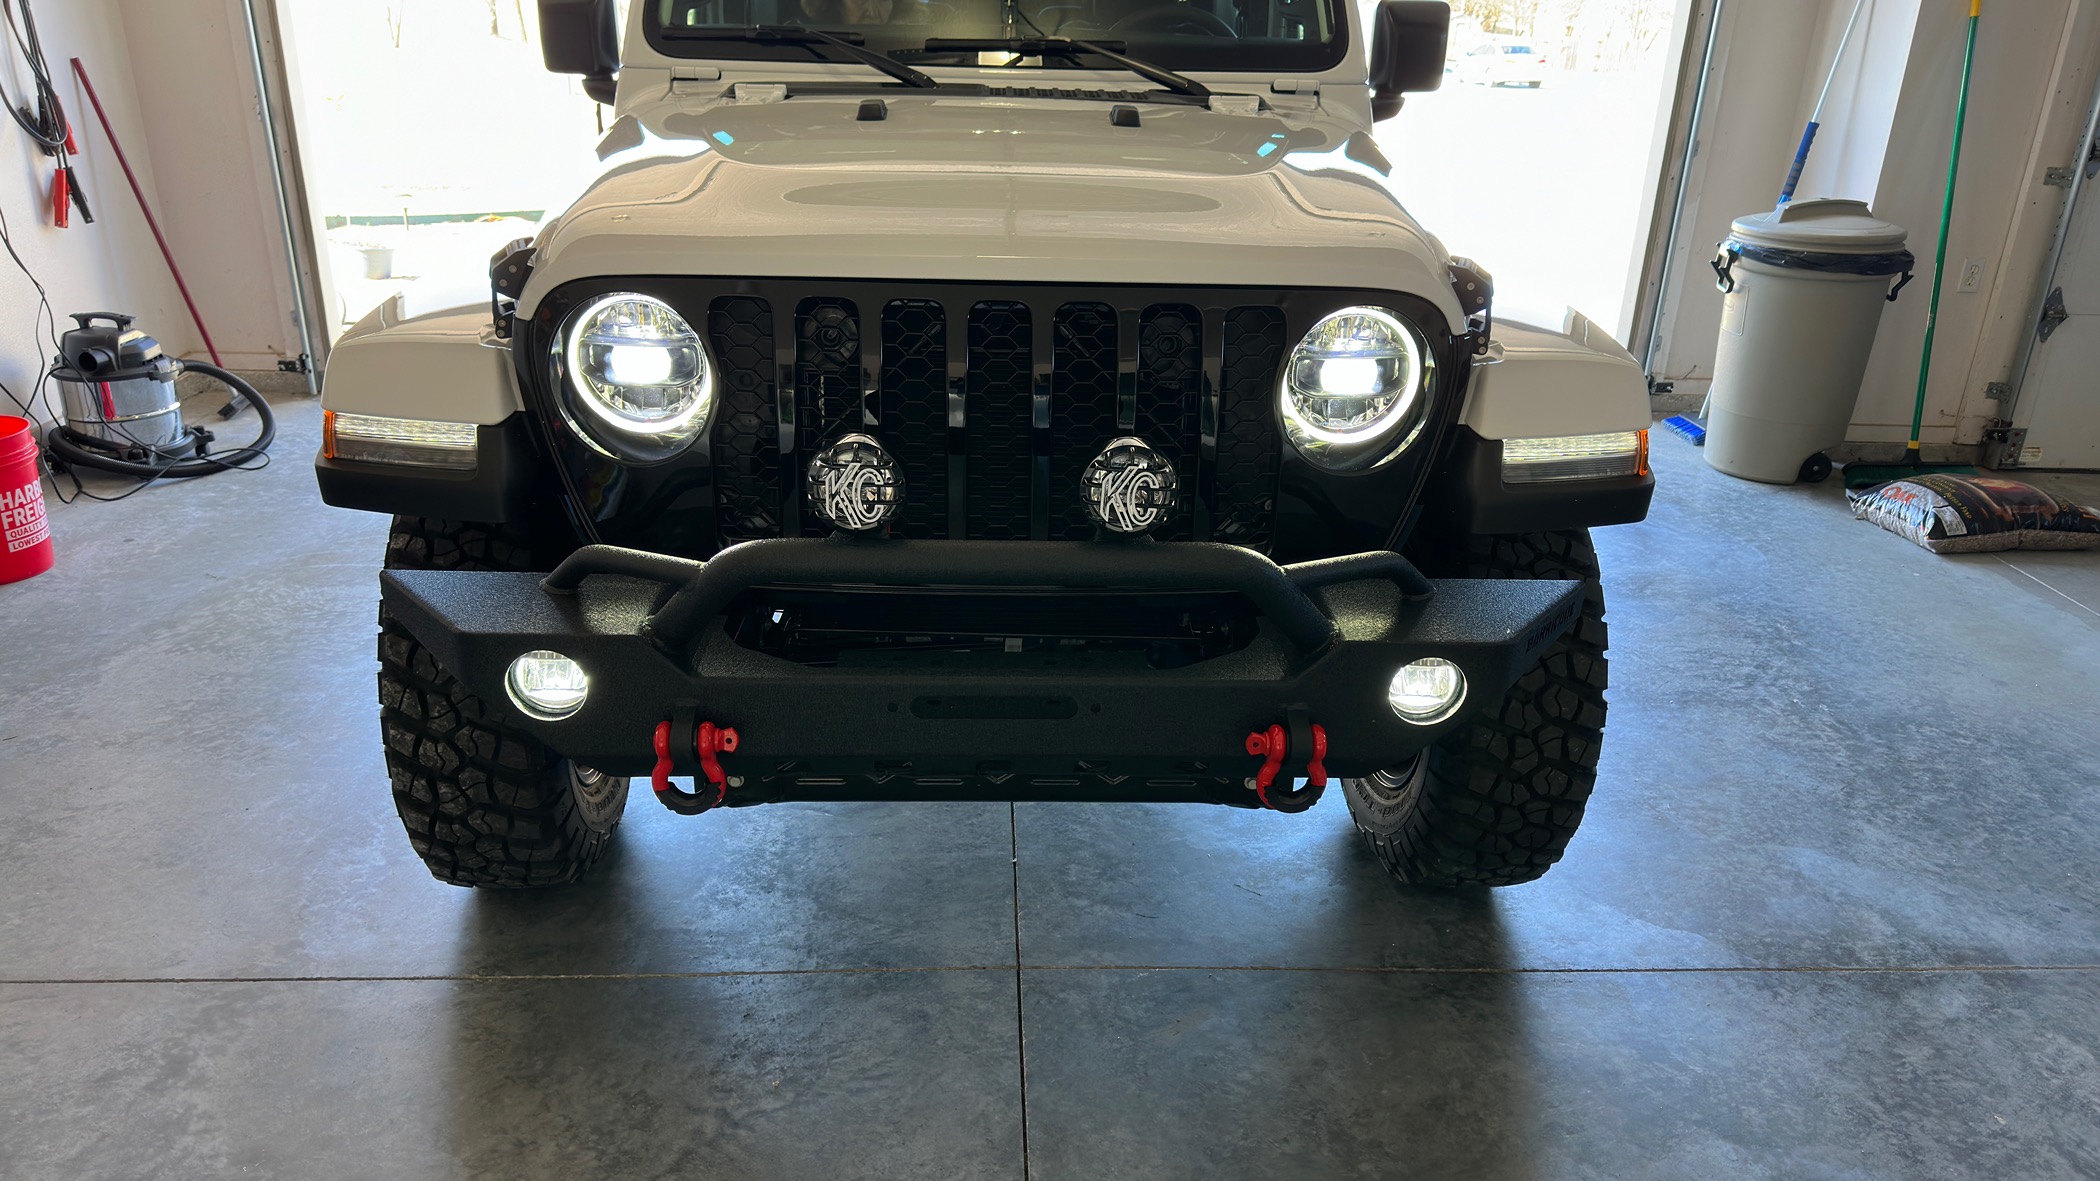 Jeep Gladiator Front End Friday!! Let's see those Gladiator Front Ends! IMG_1118